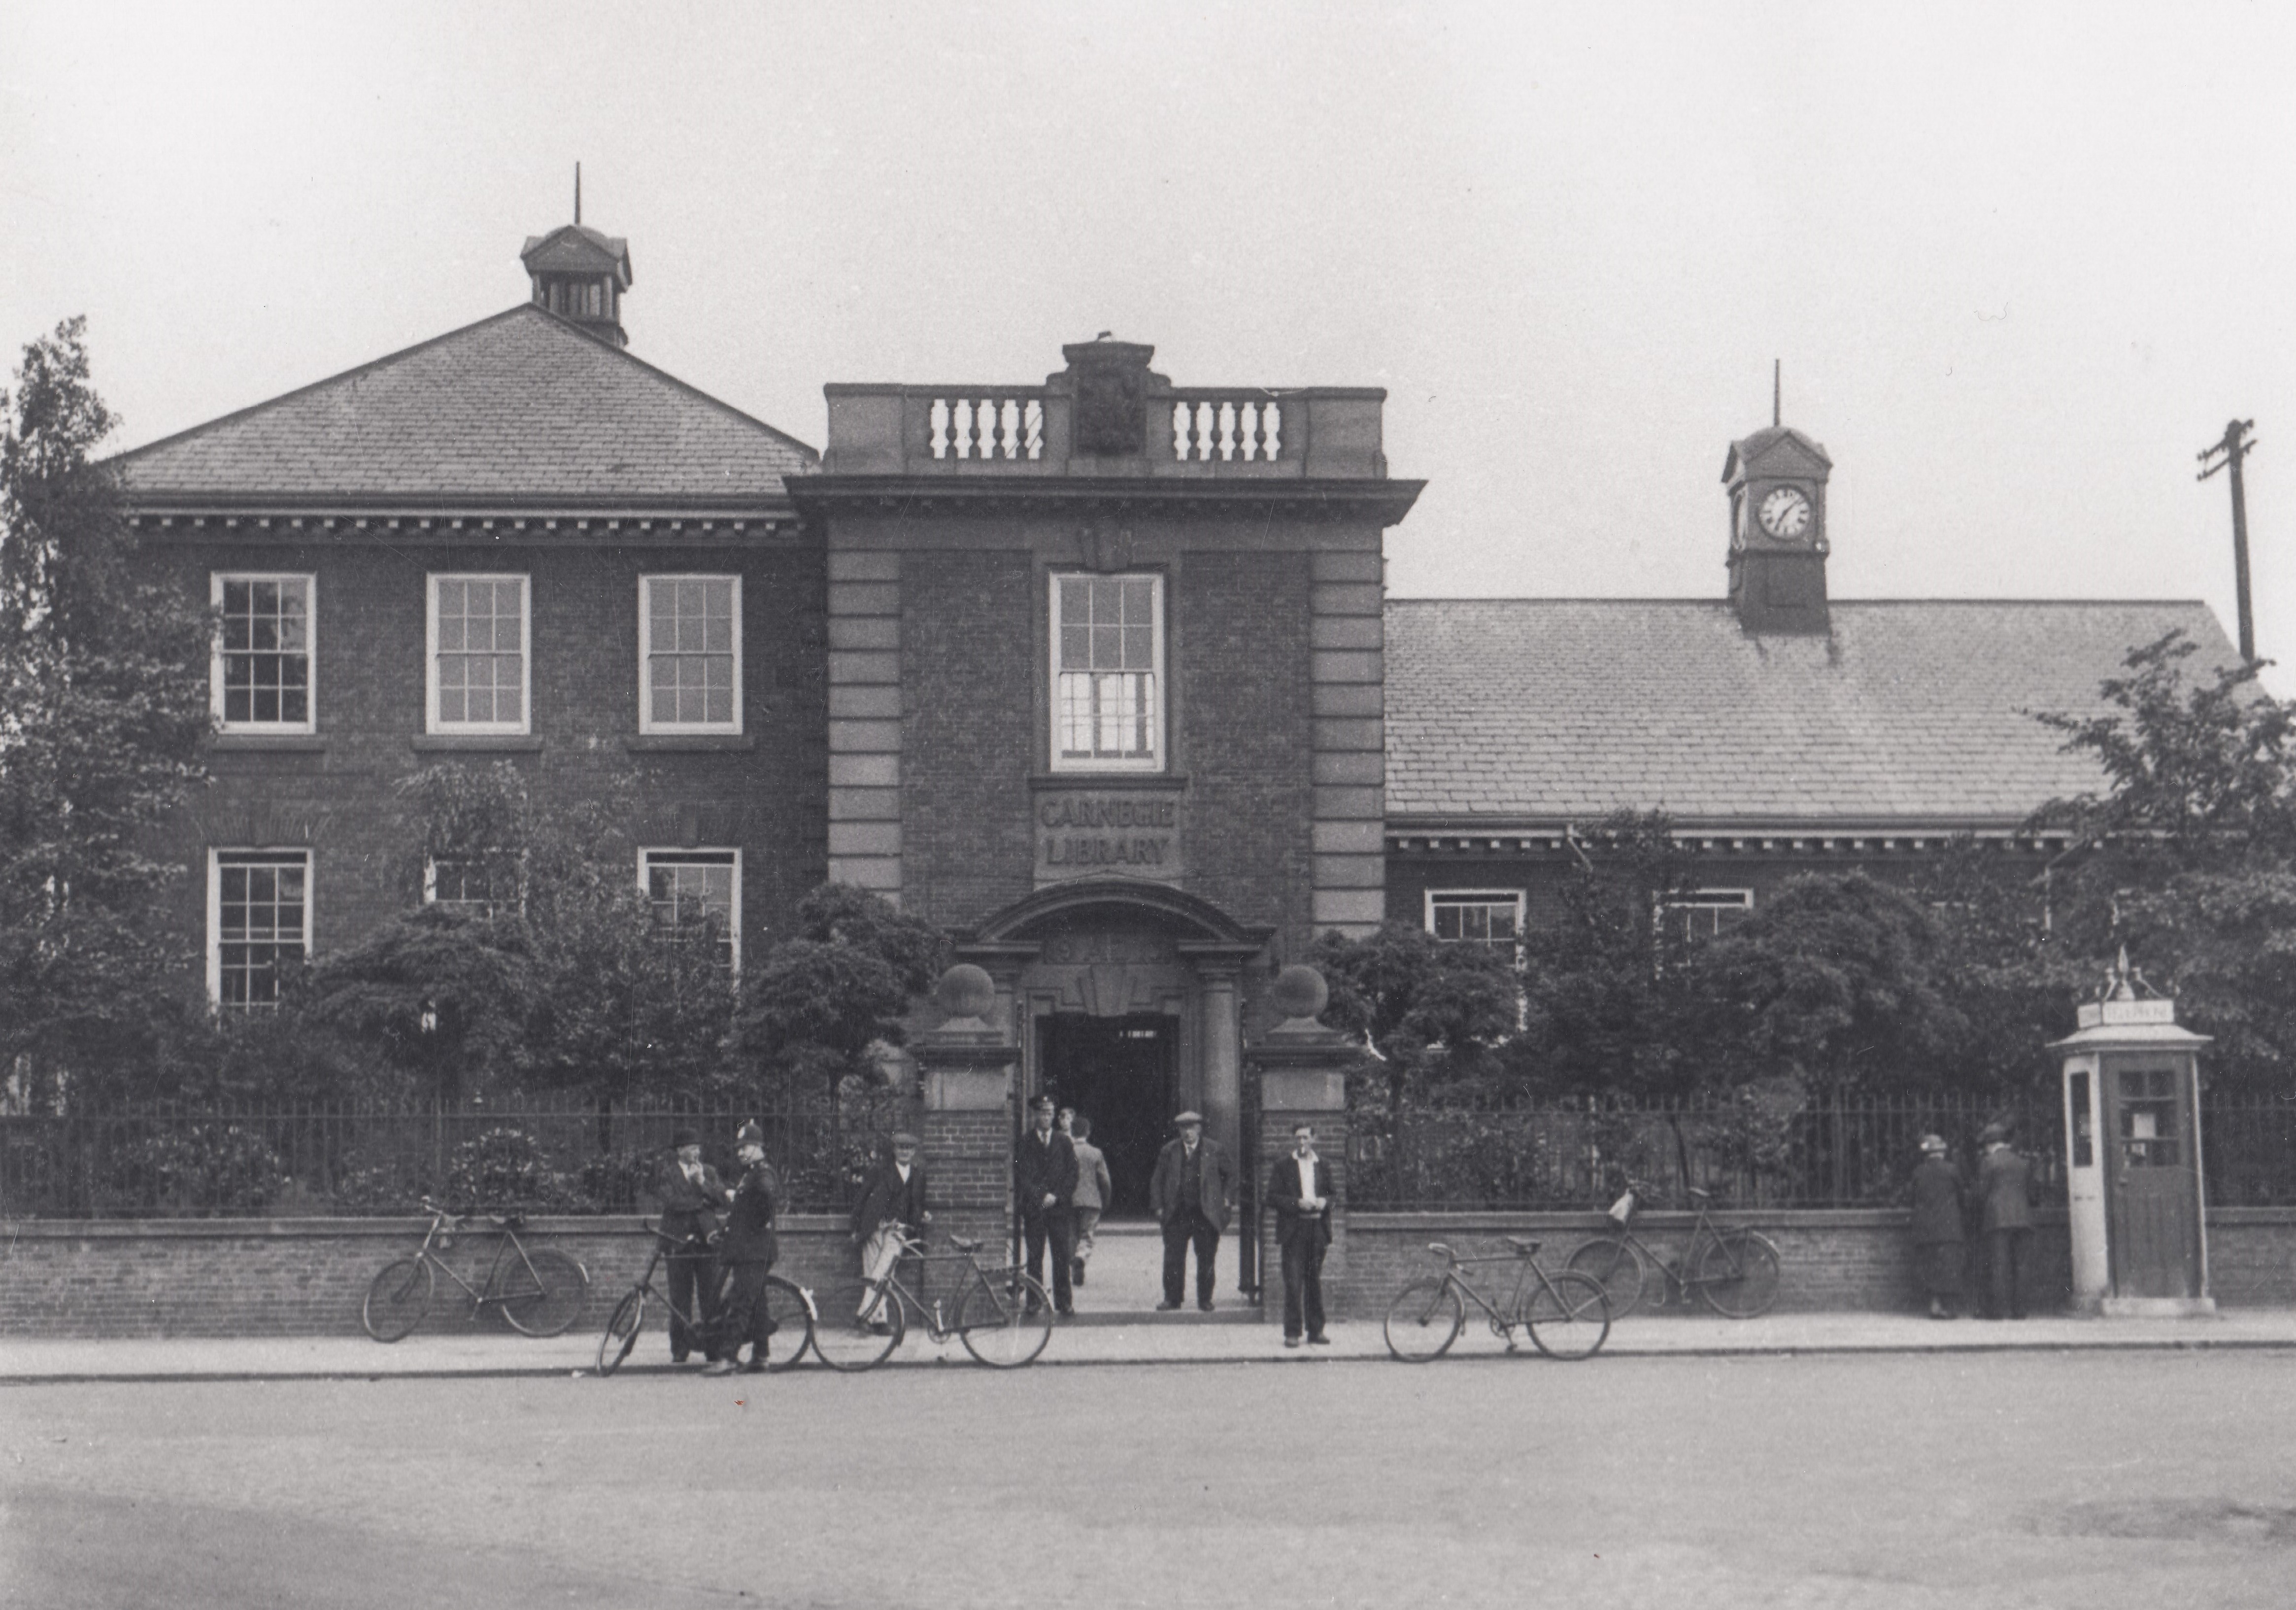 old pear tree library in 1916 buildings attached in black and white photo